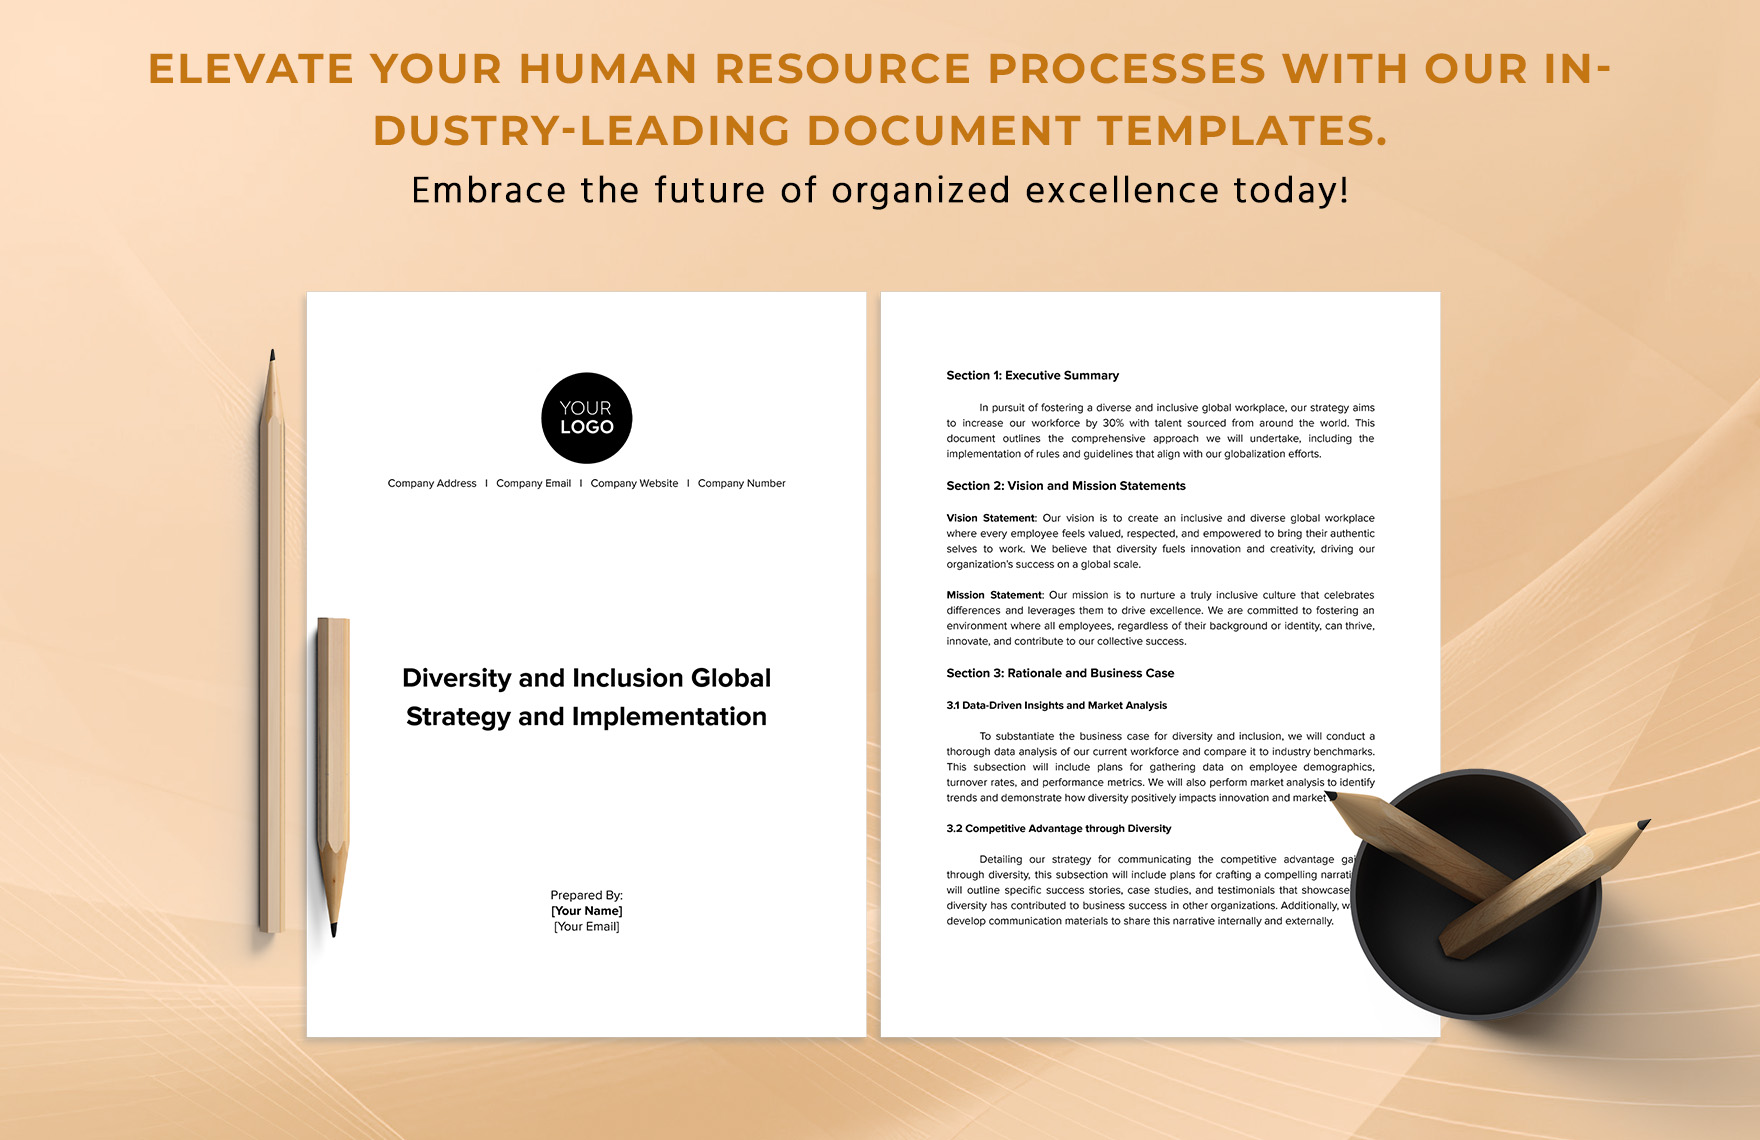 Diversity and Inclusion Global Strategy and Implementation HR Template